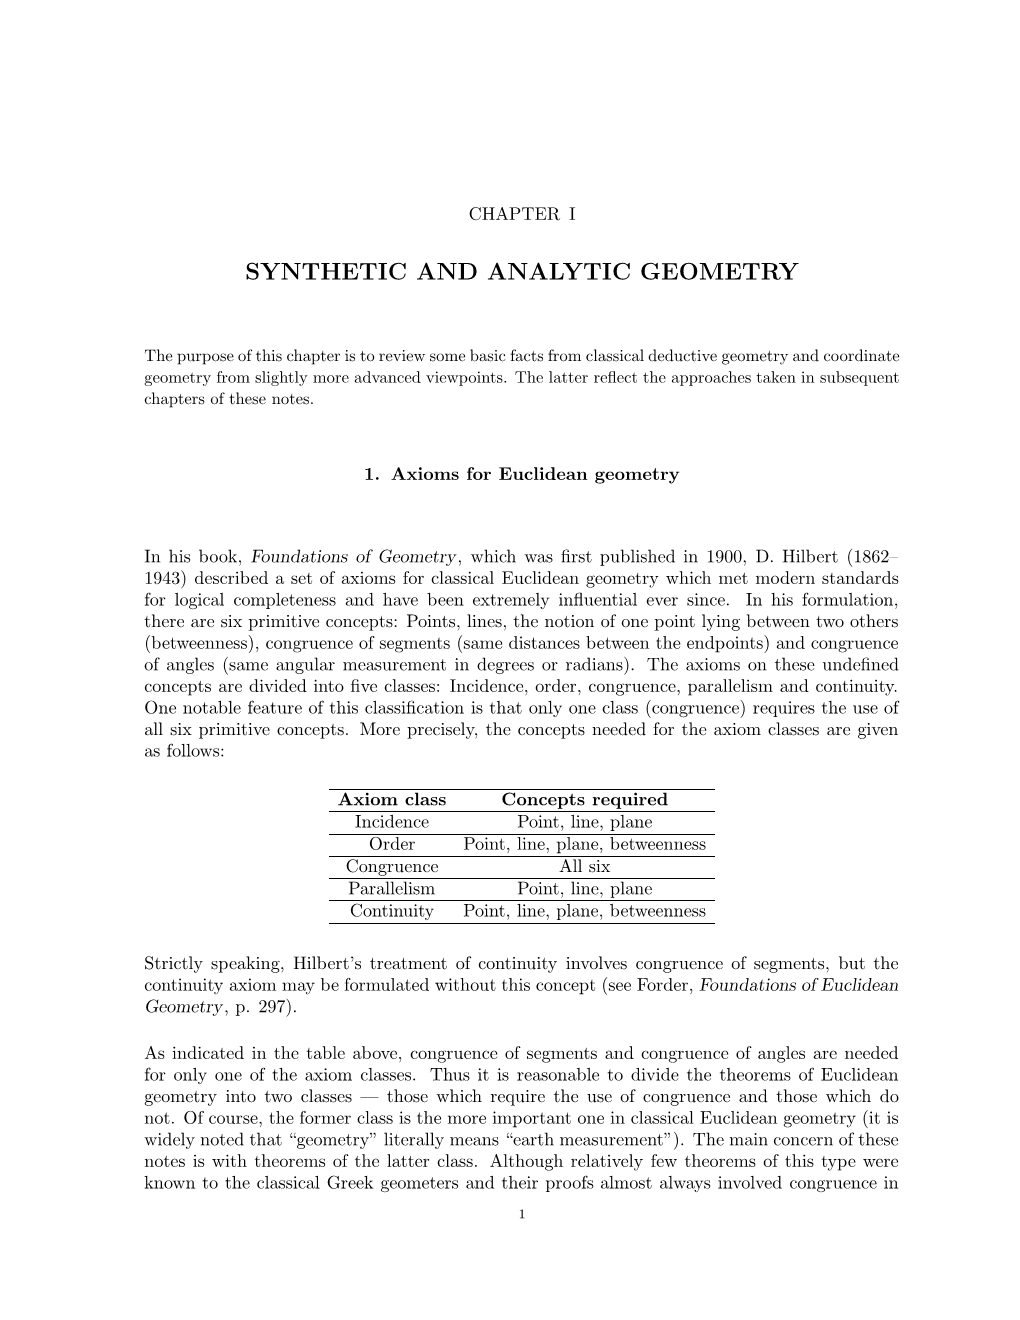 Synthetic and Analytic Geometry